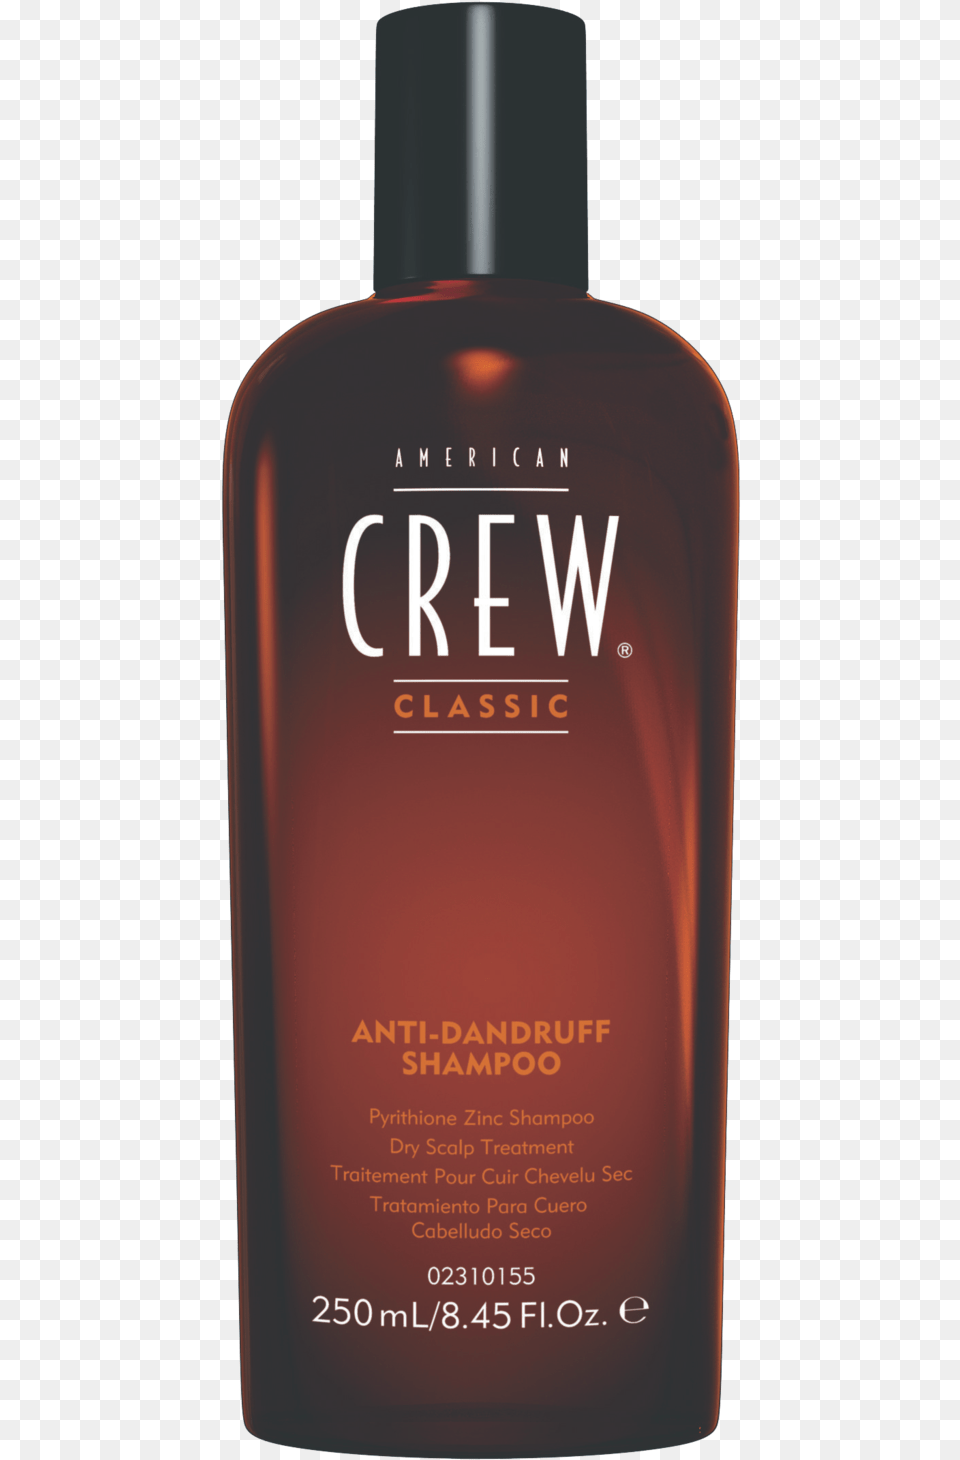 Home Shop American Crew Shampoos American Crew Boost Shampoo, Bottle, Cosmetics, Perfume, Aftershave Png Image